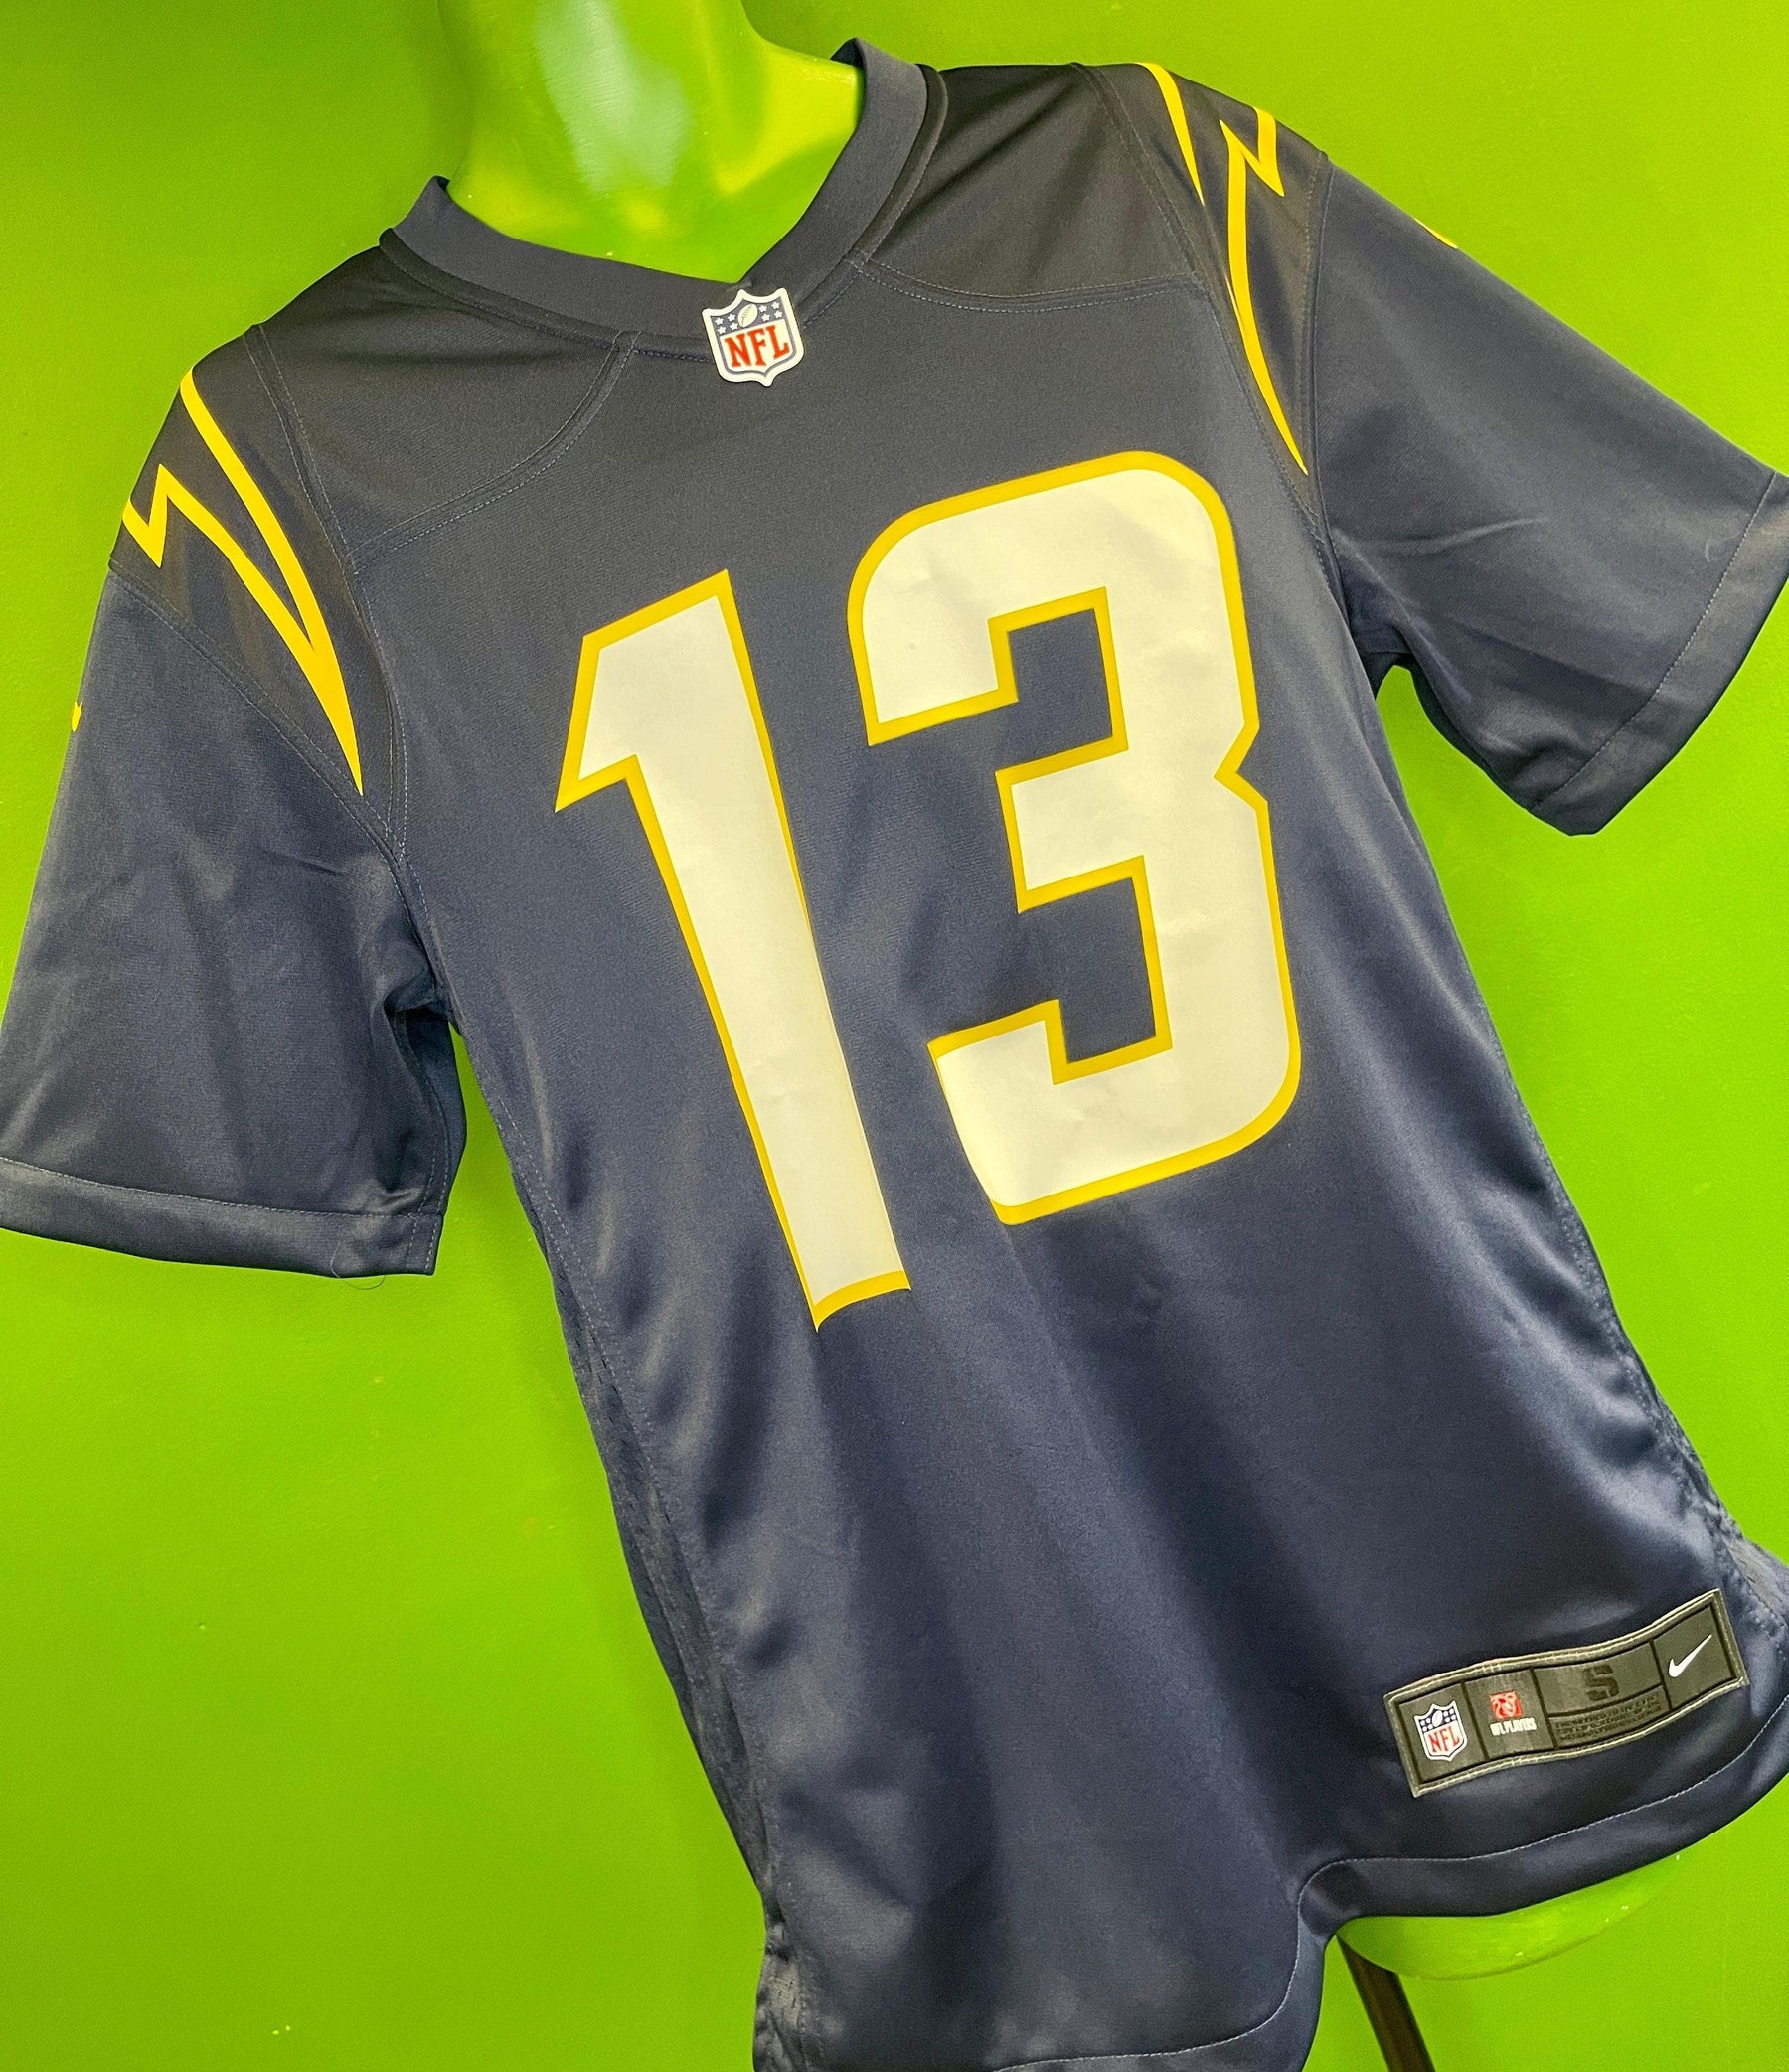 NFL Los Angeles Chargers Keenan Allen #13 Game Jersey Men's Small NWT